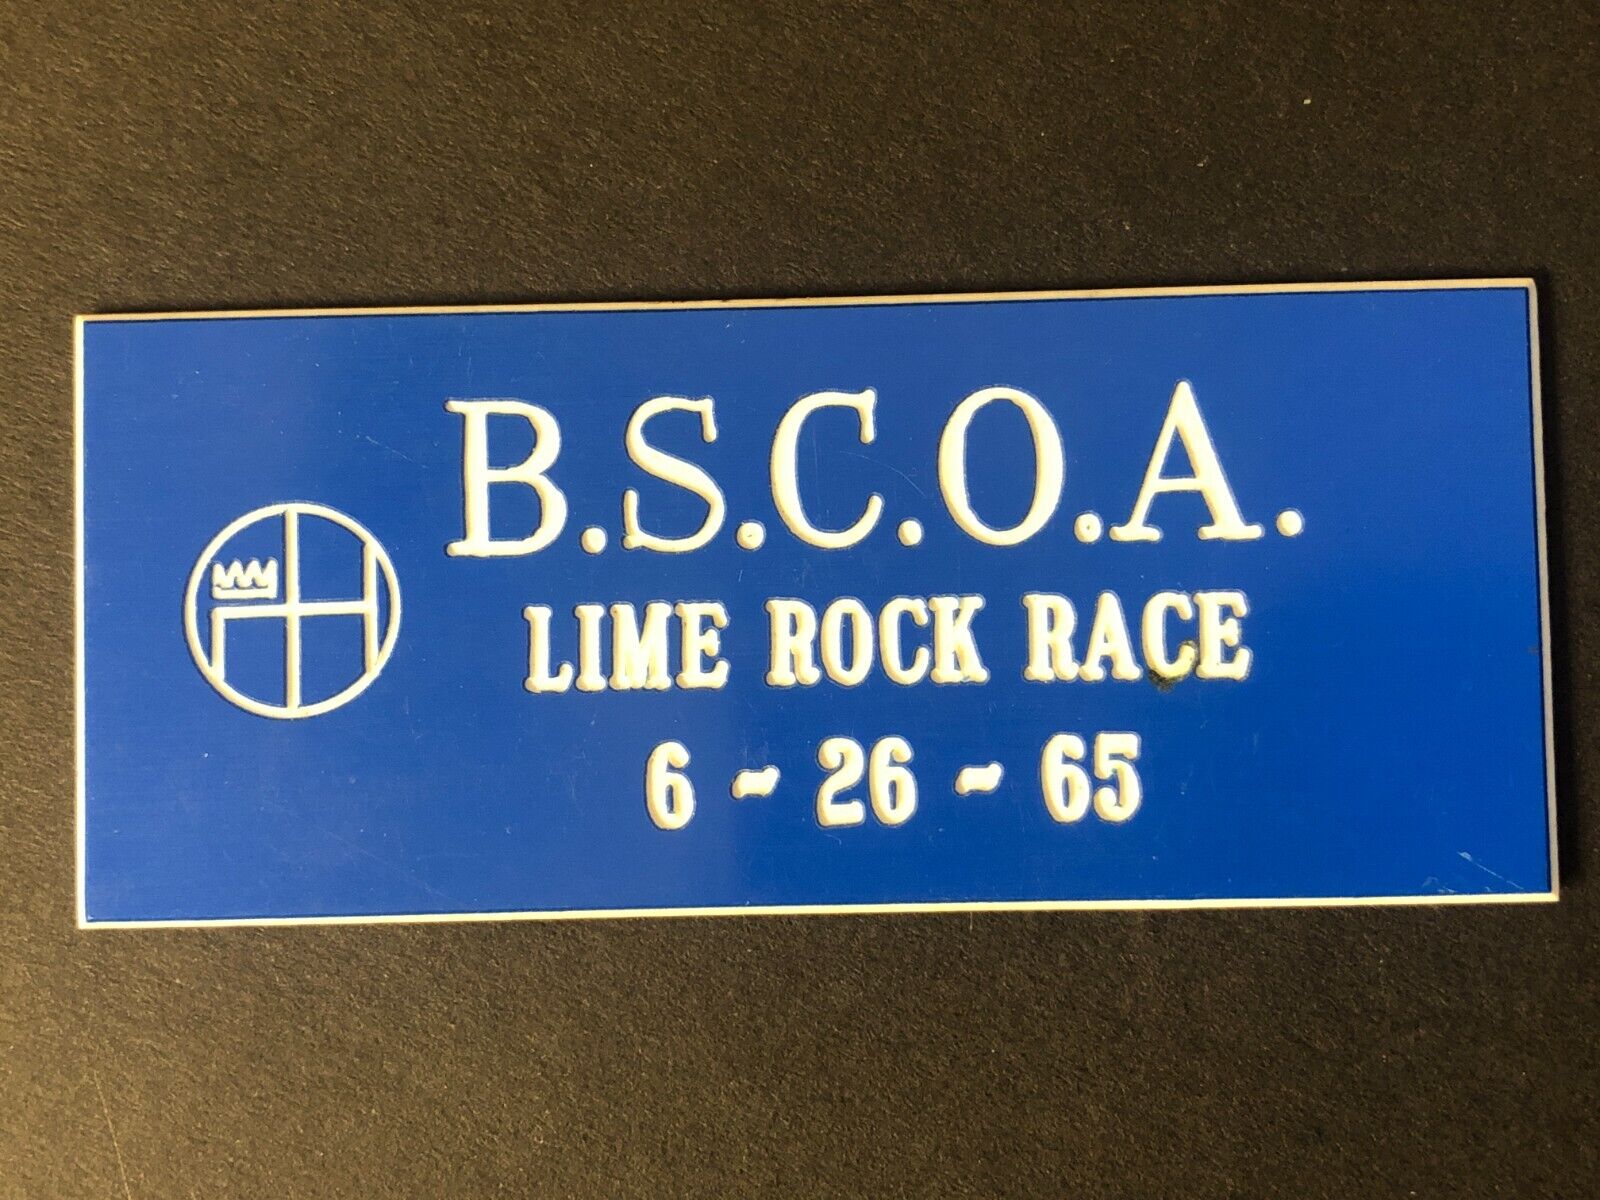 BSCOA British Sports Car Owners Lime Rock Race 6/26 1965 Auto Racing Wall Plaque